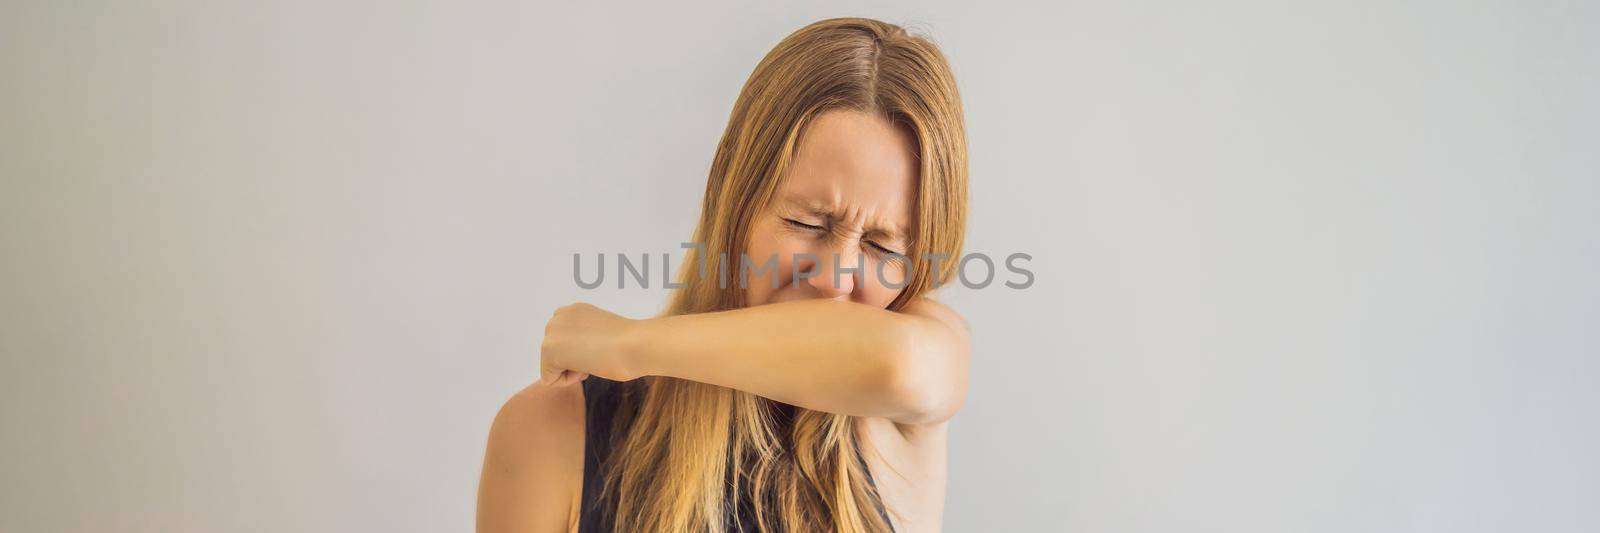 Comparison between wrong and right way to sneeze to prevent virus infection. Caucasian woman sneezing, coughing into her arm or elbow to prevent spread Covid-19,Coronavirus. BANNER, LONG FORMAT